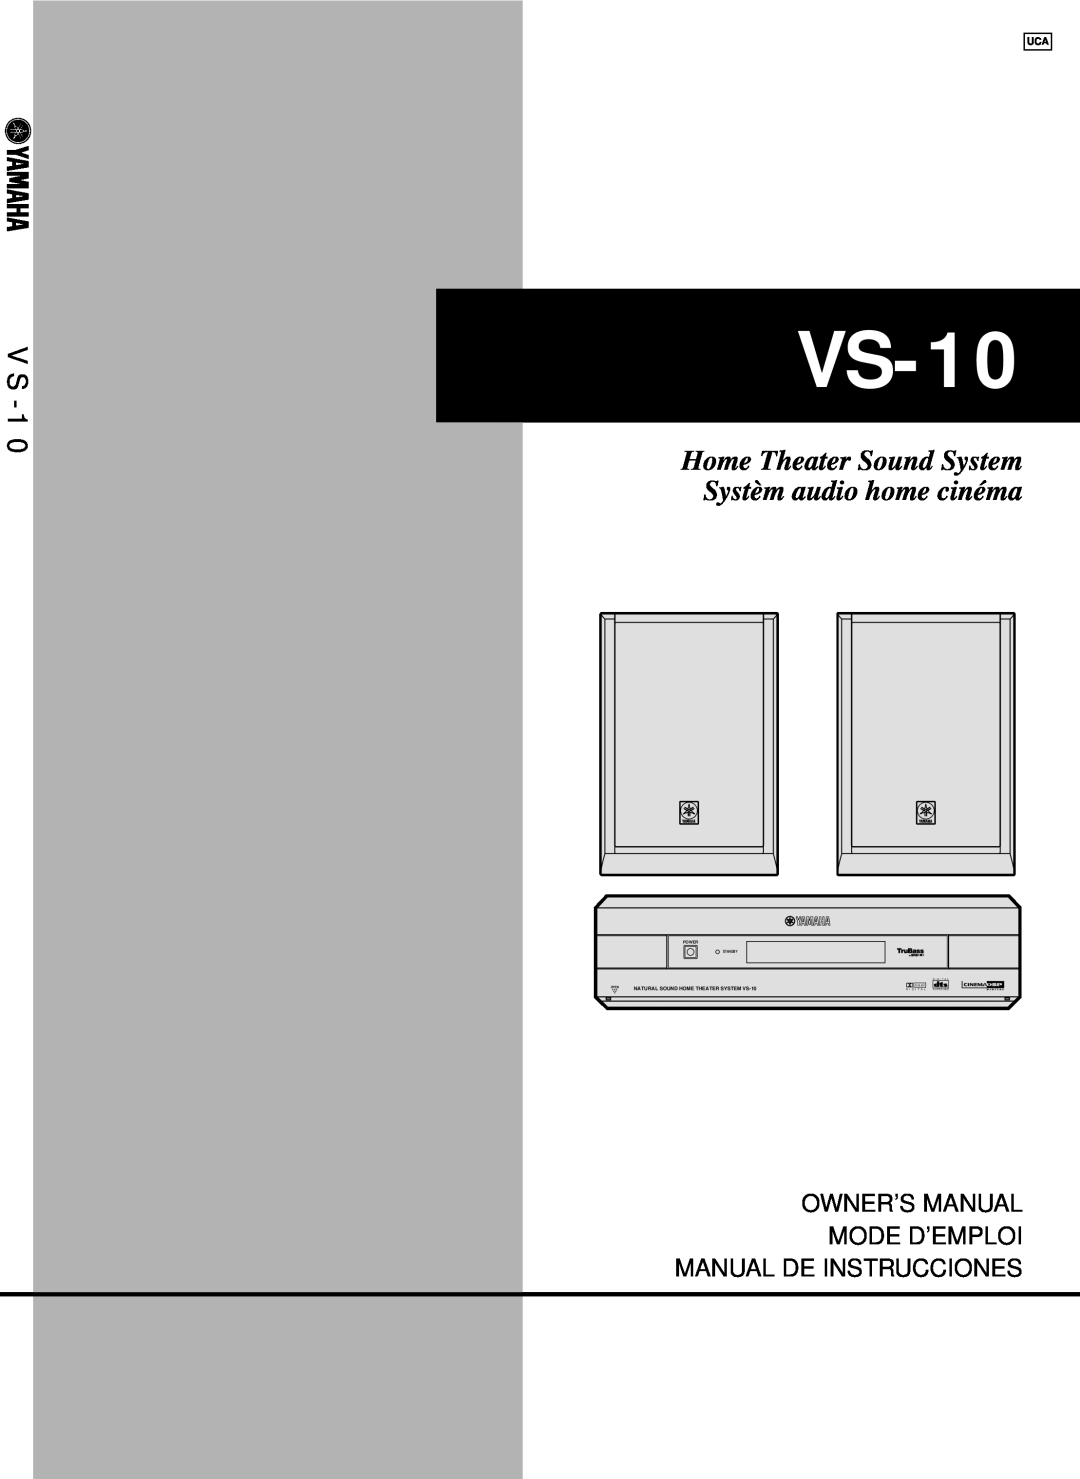 Yamaha owner manual Manual De Instrucciones, Power, NATURAL SOUND HOME THEATER SYSTEM VS-10, Standby, Open, Dolby 